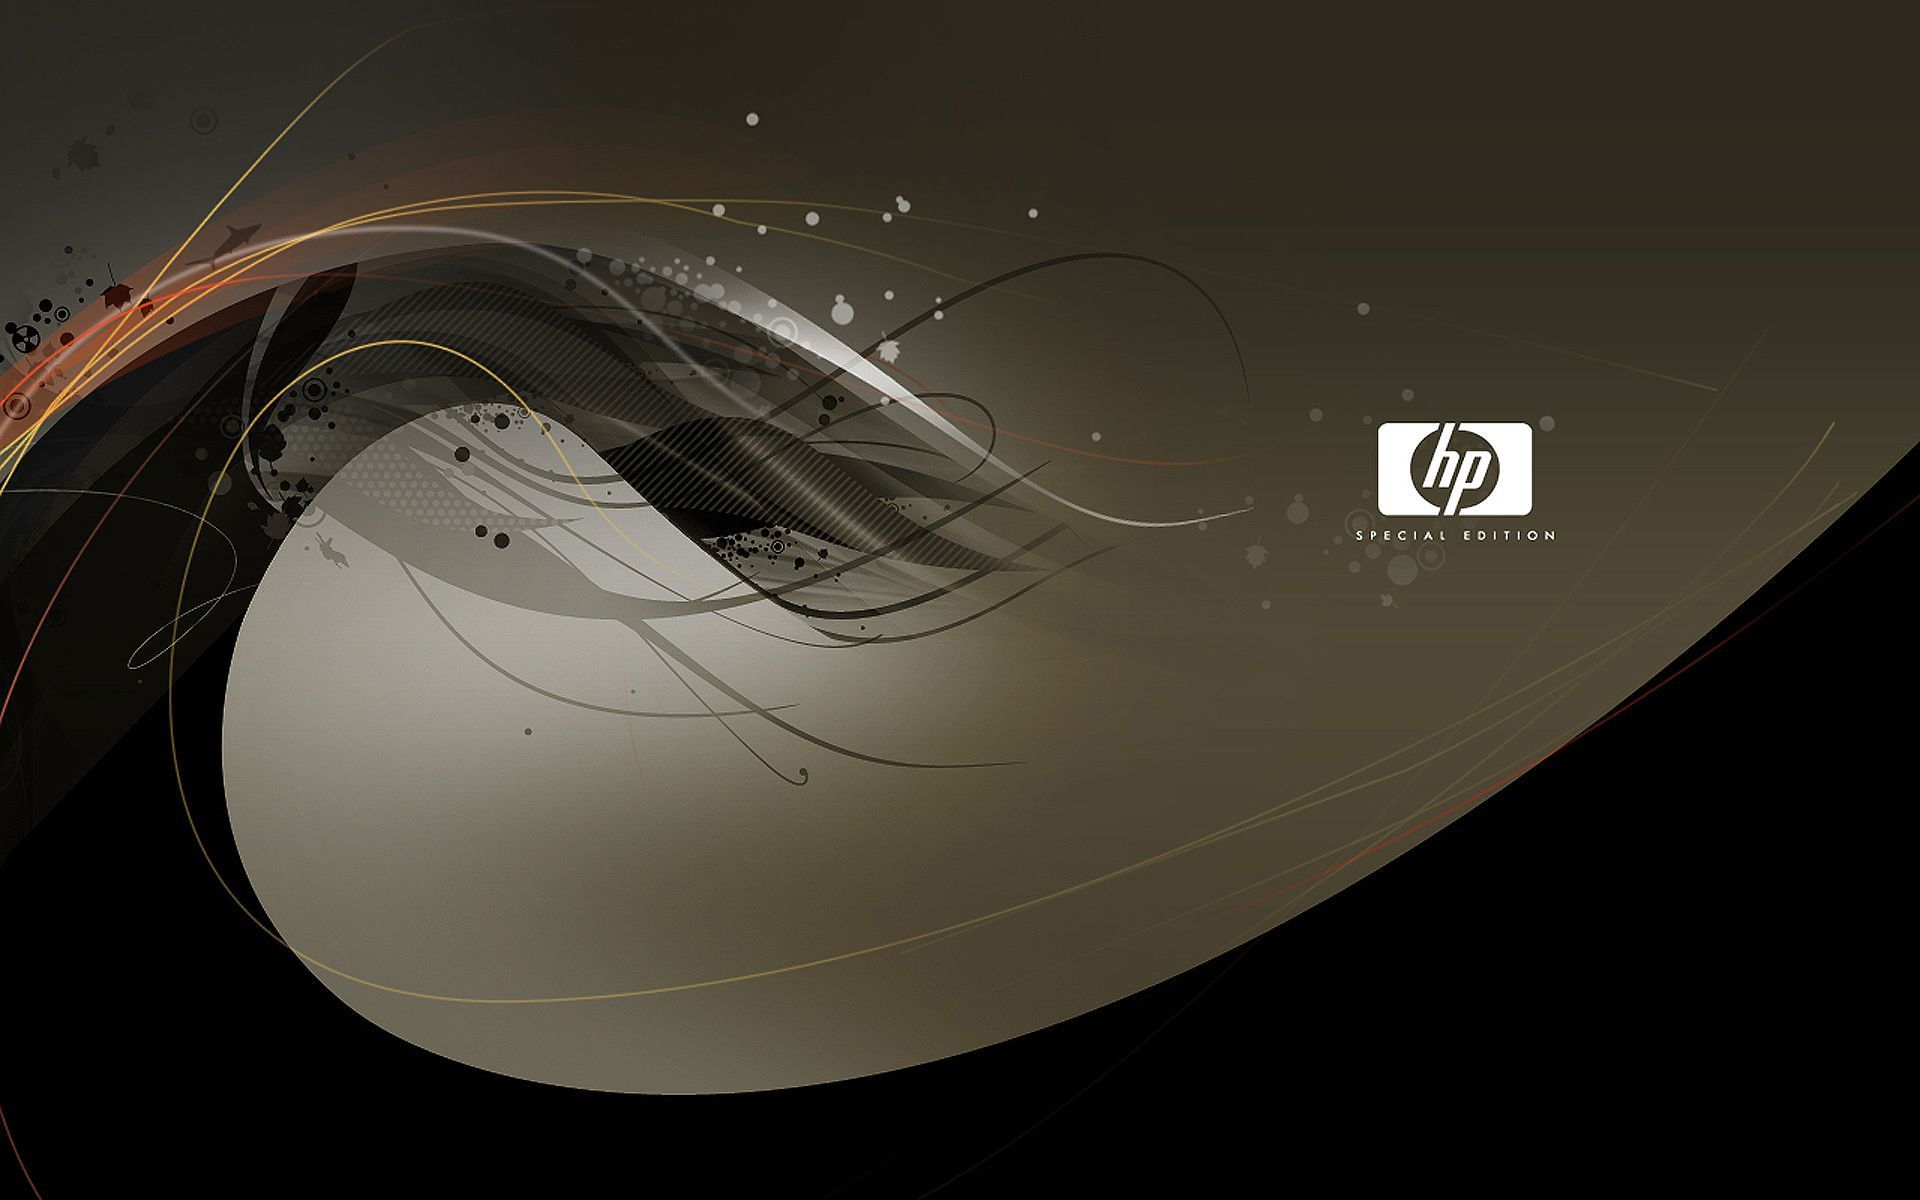 HP Laptop Backgrounds